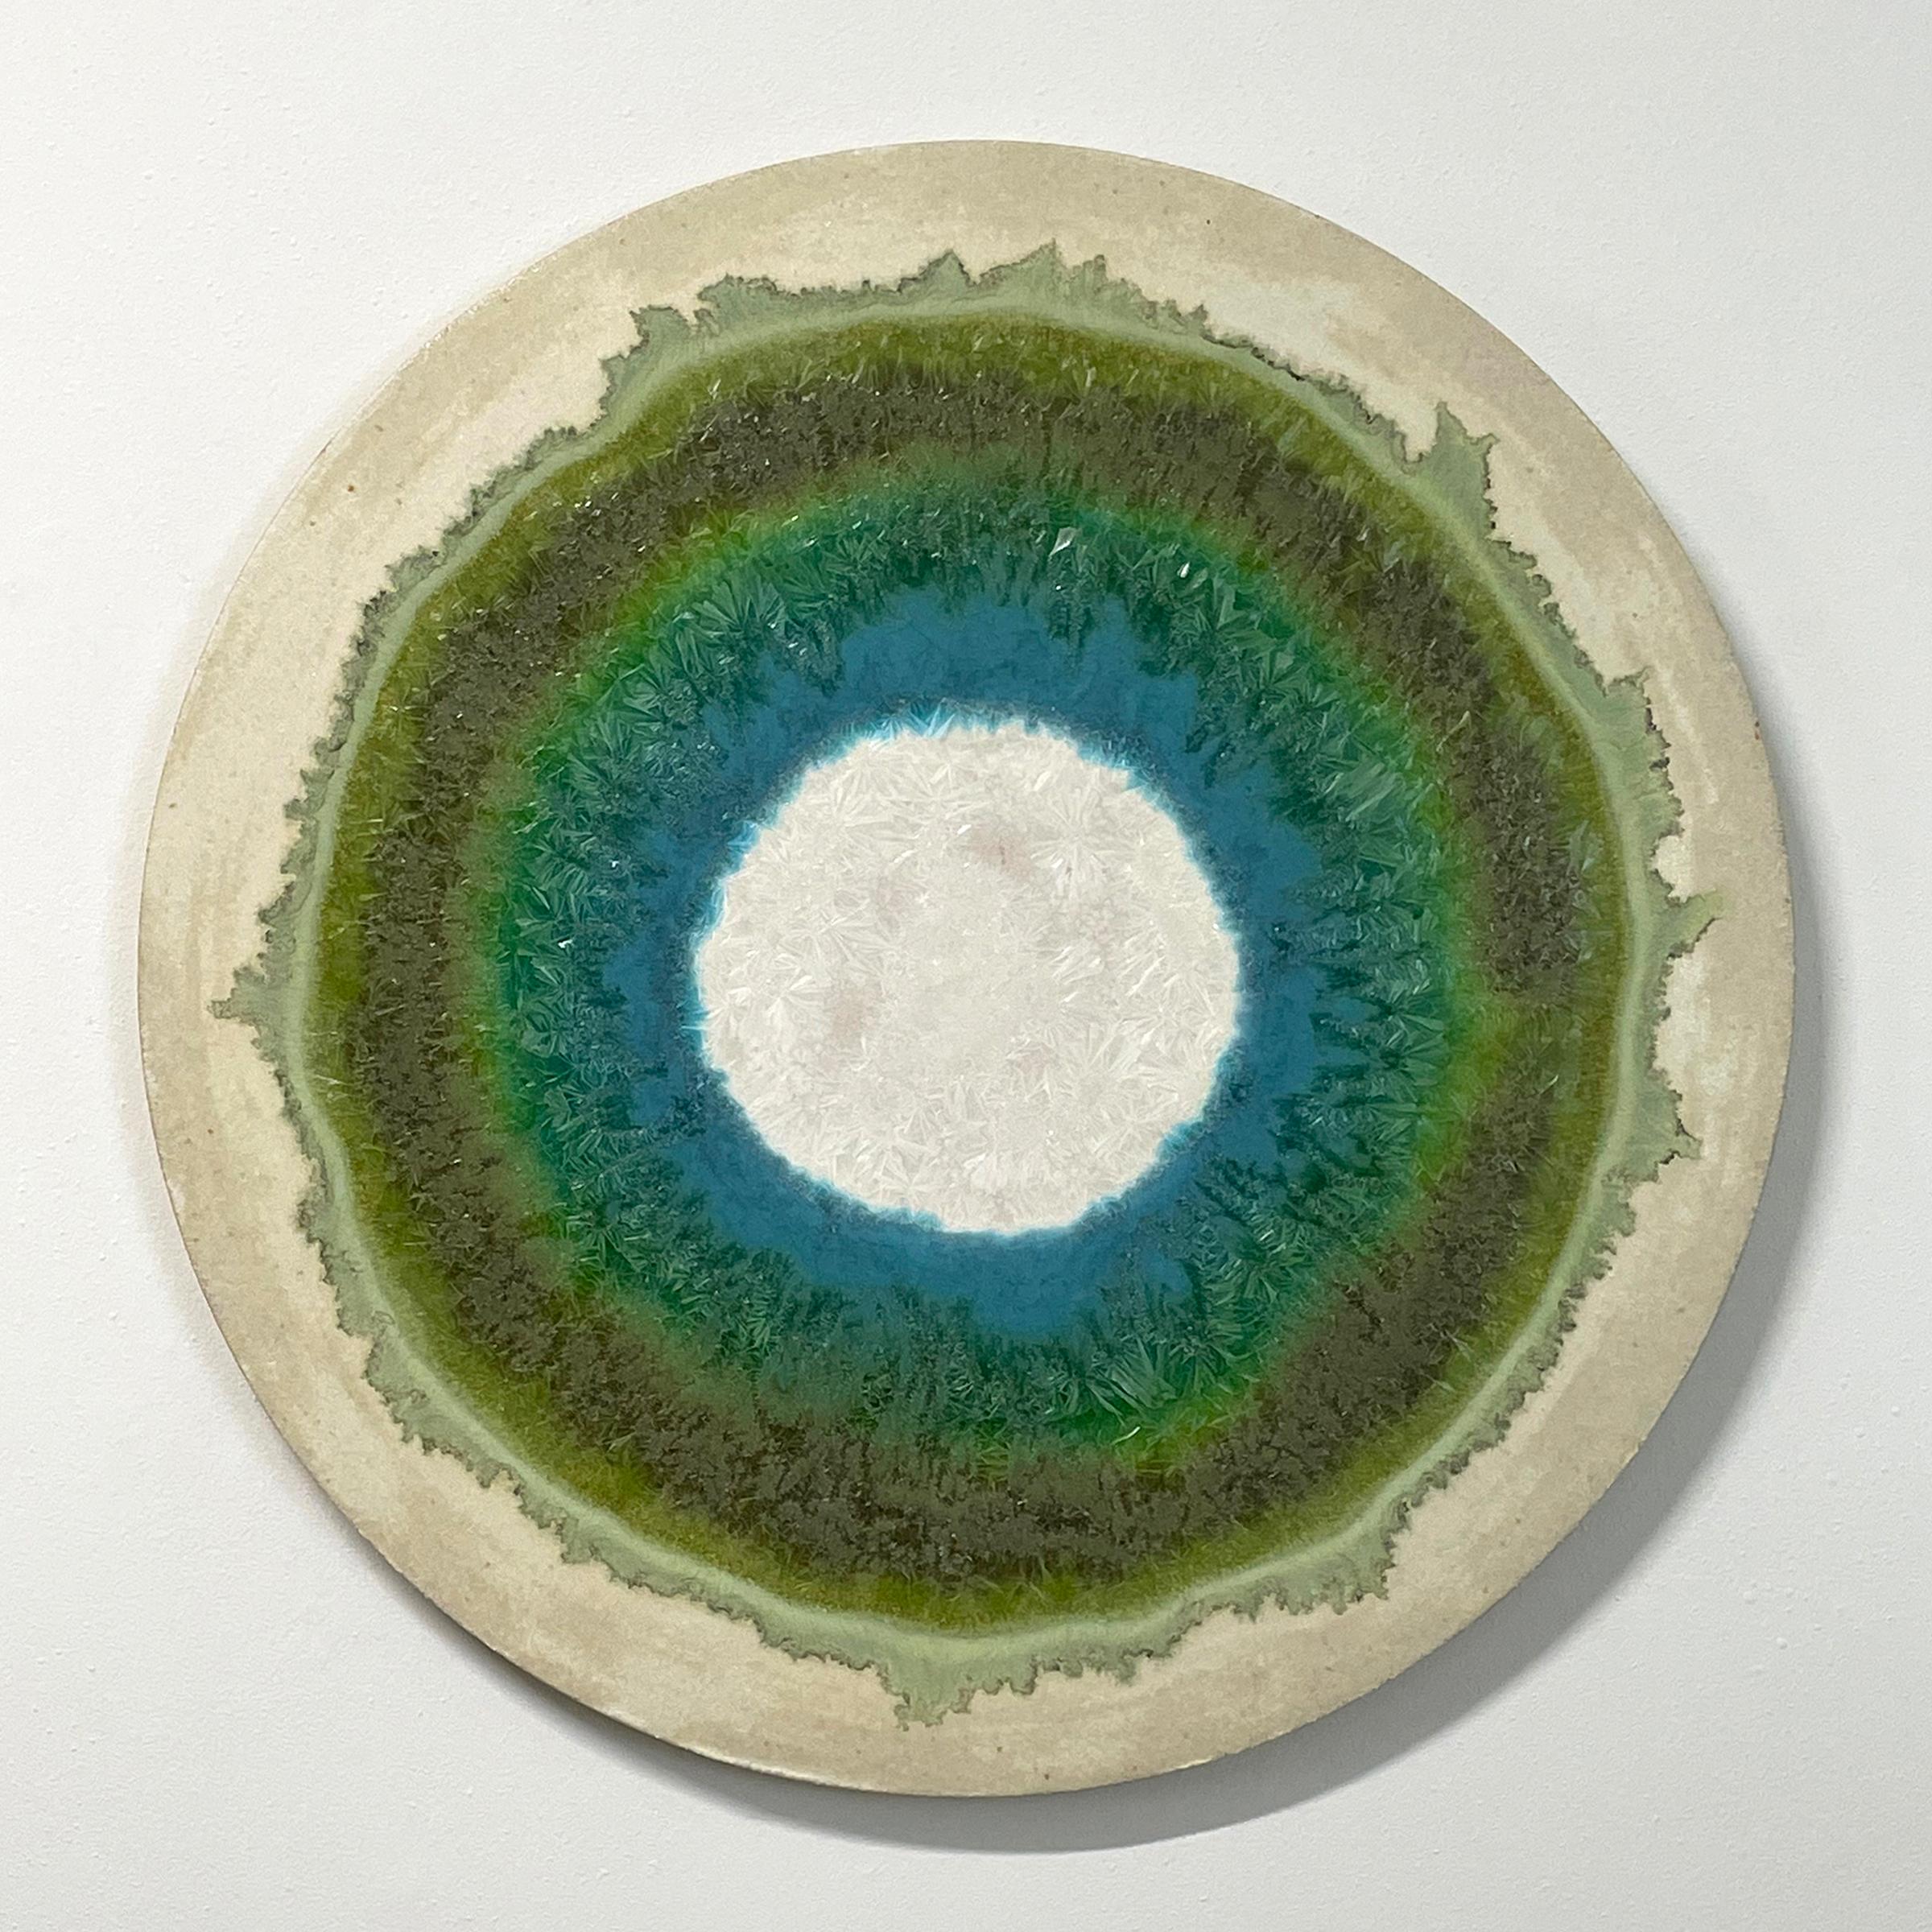 White Noise
Ceramic crystal glaze painting by William Edwards
Hand rolled earthenware circular slab with crystal glaze. 

William received his BFA in sculpture from the historic San Francisco Art Institute and his MFA from UC Davis. William produces